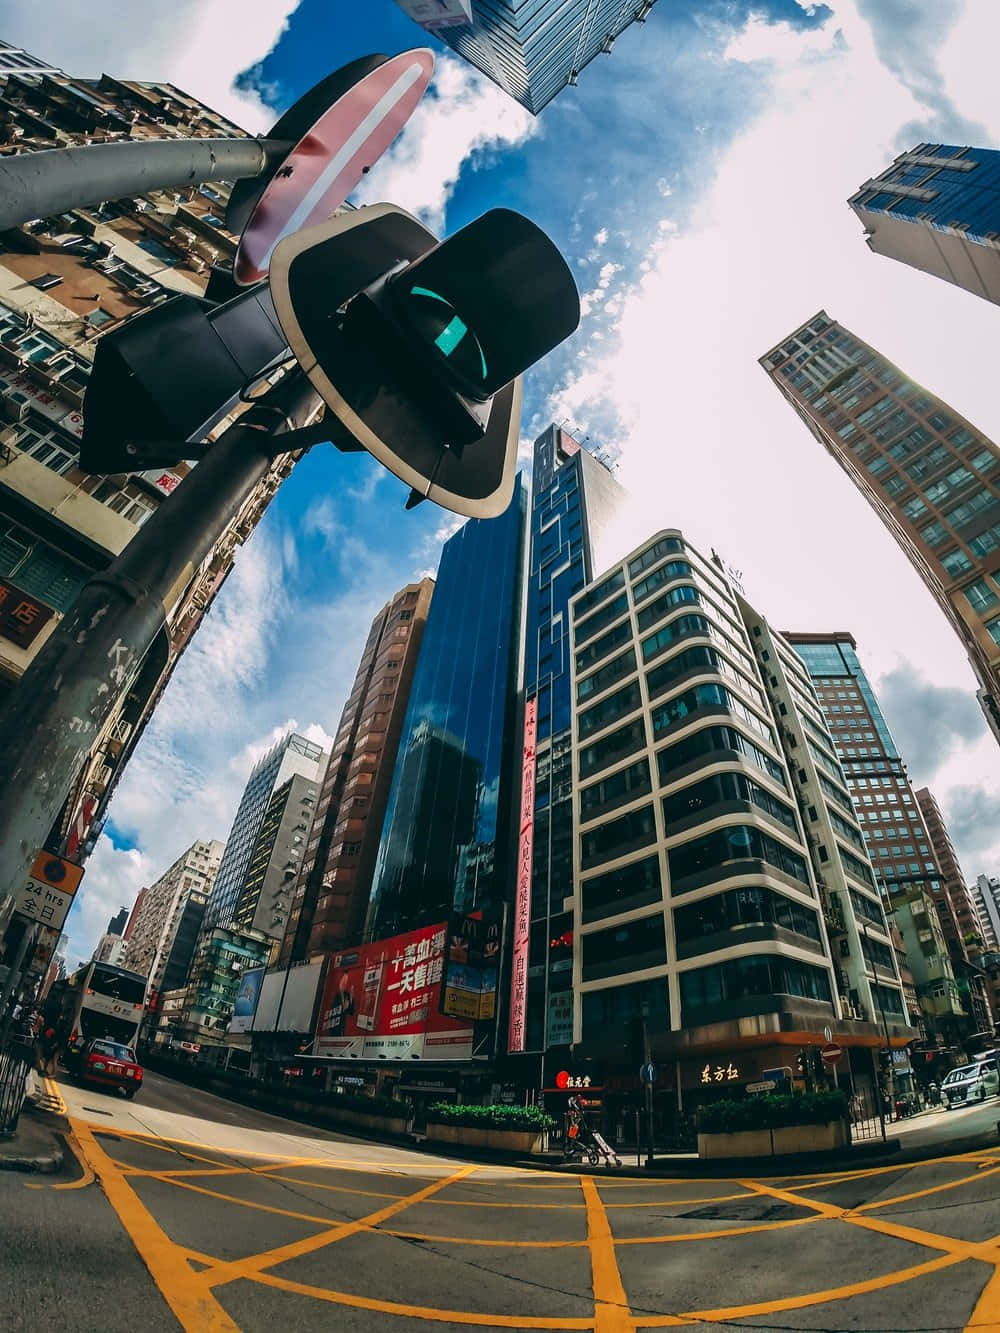 A Fish Eye View Of A City Street With Tall Buildings